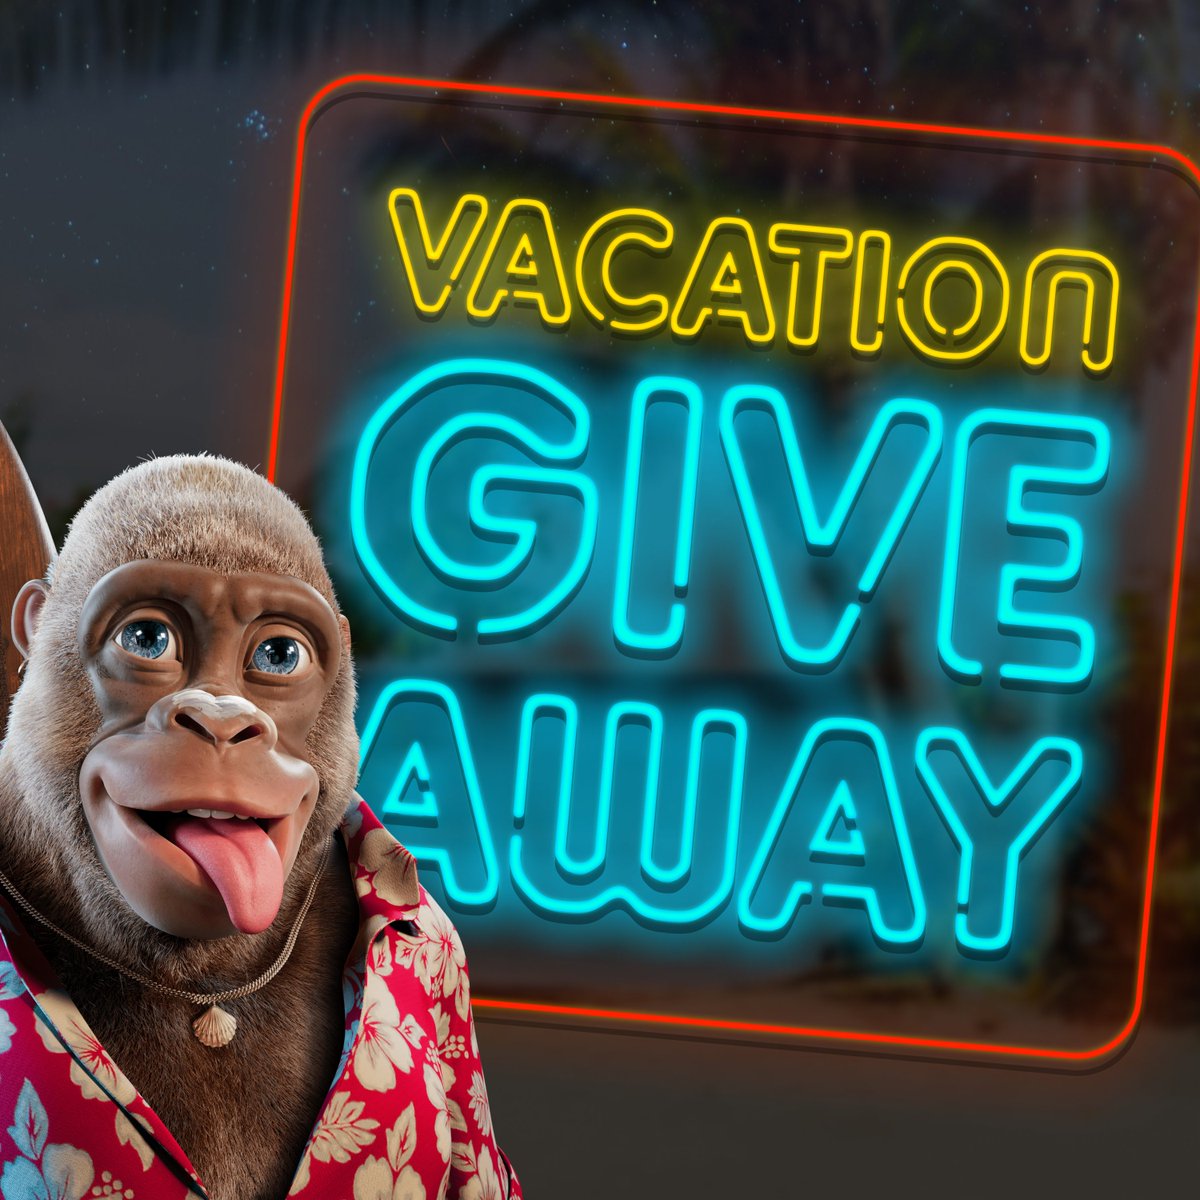 Mystery vacation giveaway on the AKC house. 🏝

How to win:
1: You need to own one Alpha Kongs NFT or a tribe item (minis don’t count).

2: RT + tag three friends.

3: Join the discord community and have genuine conversations.

May the one who deserves this the most win! ❤️🍾